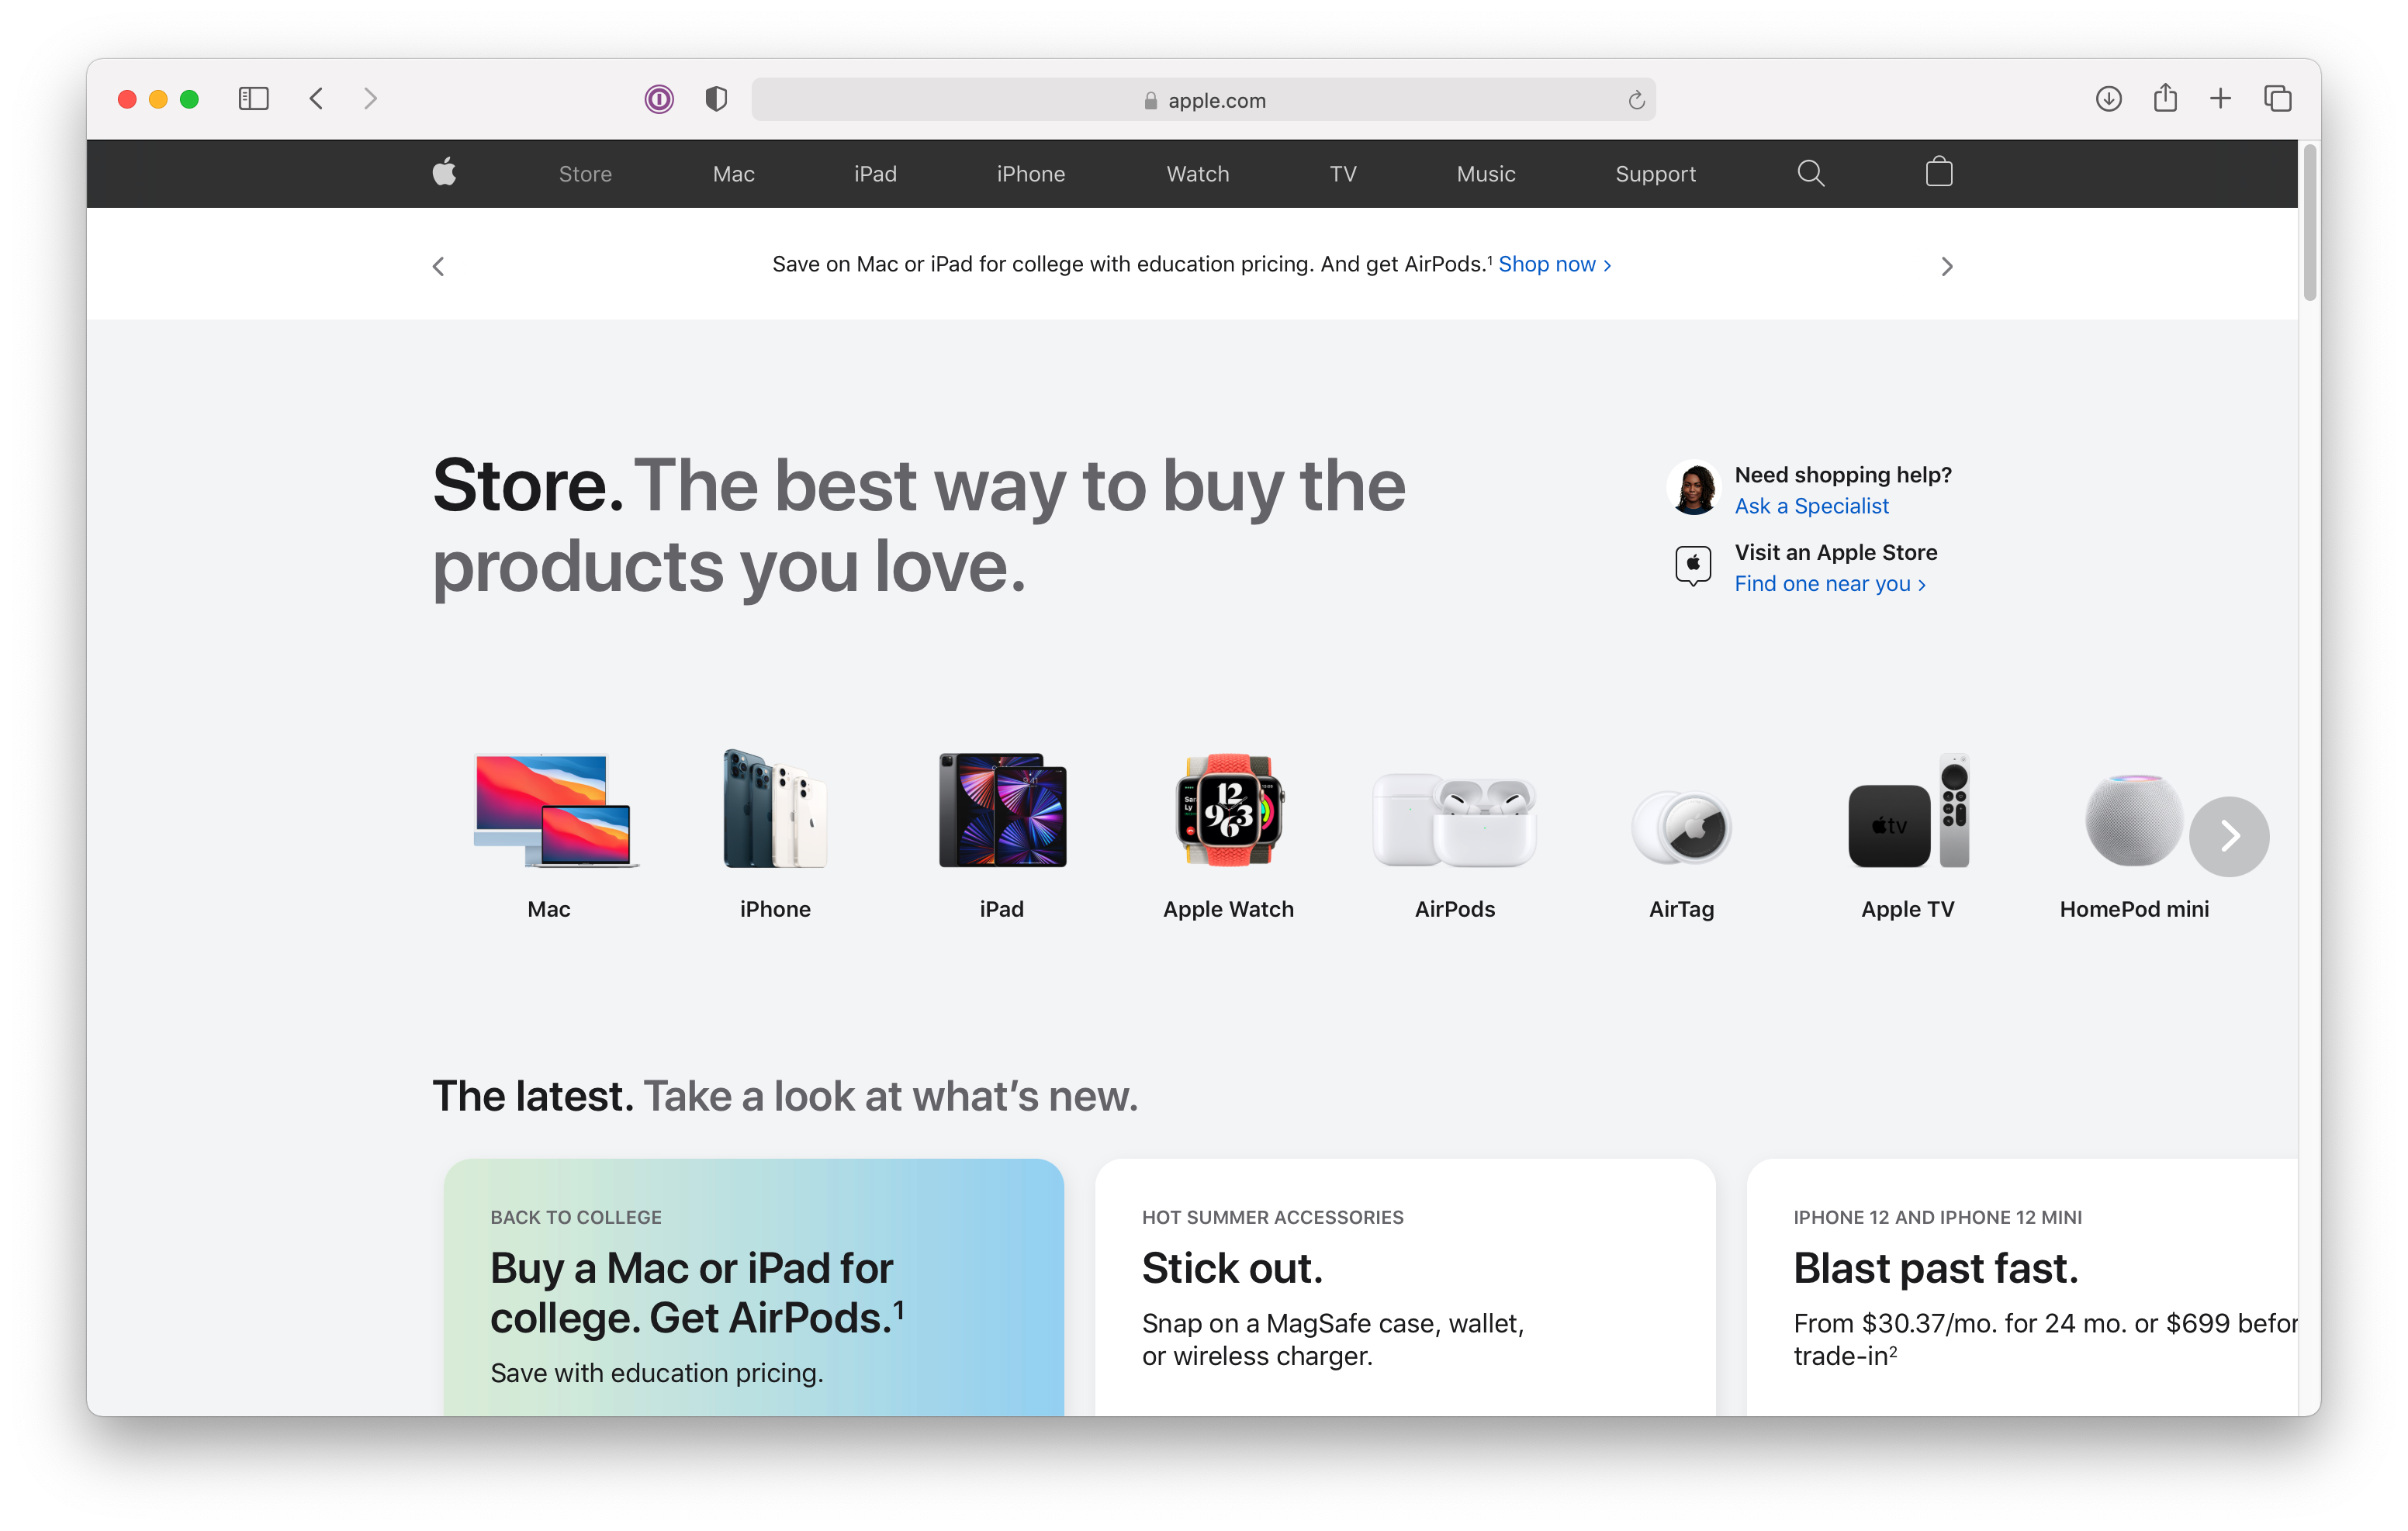 The new Store page on apple.com